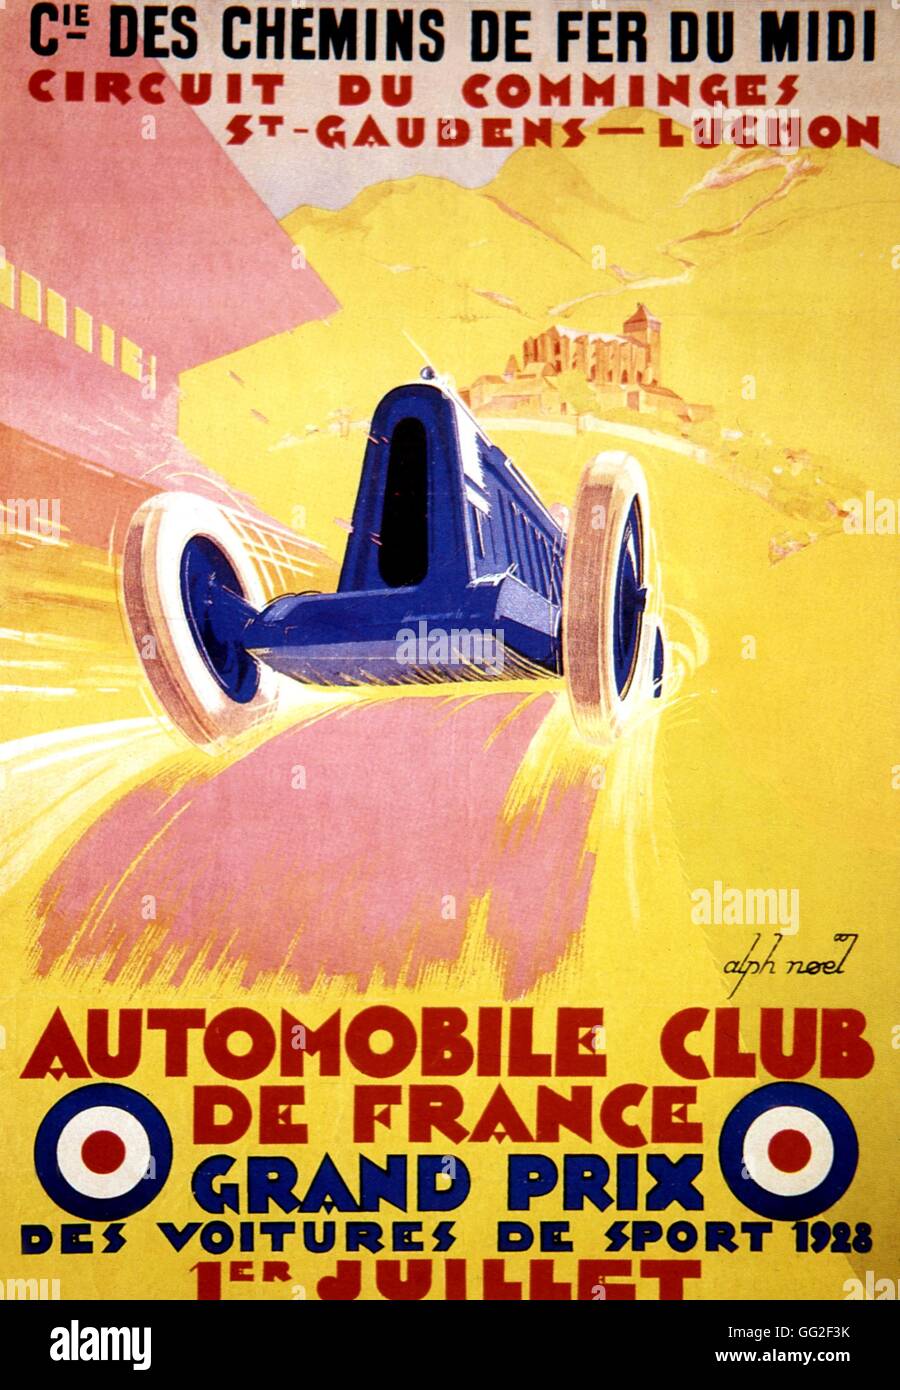 Advertising poster by Alphonse Noël: Grand prix of the Automobile Club de France, July 1st,1928.  1928 France Stock Photo